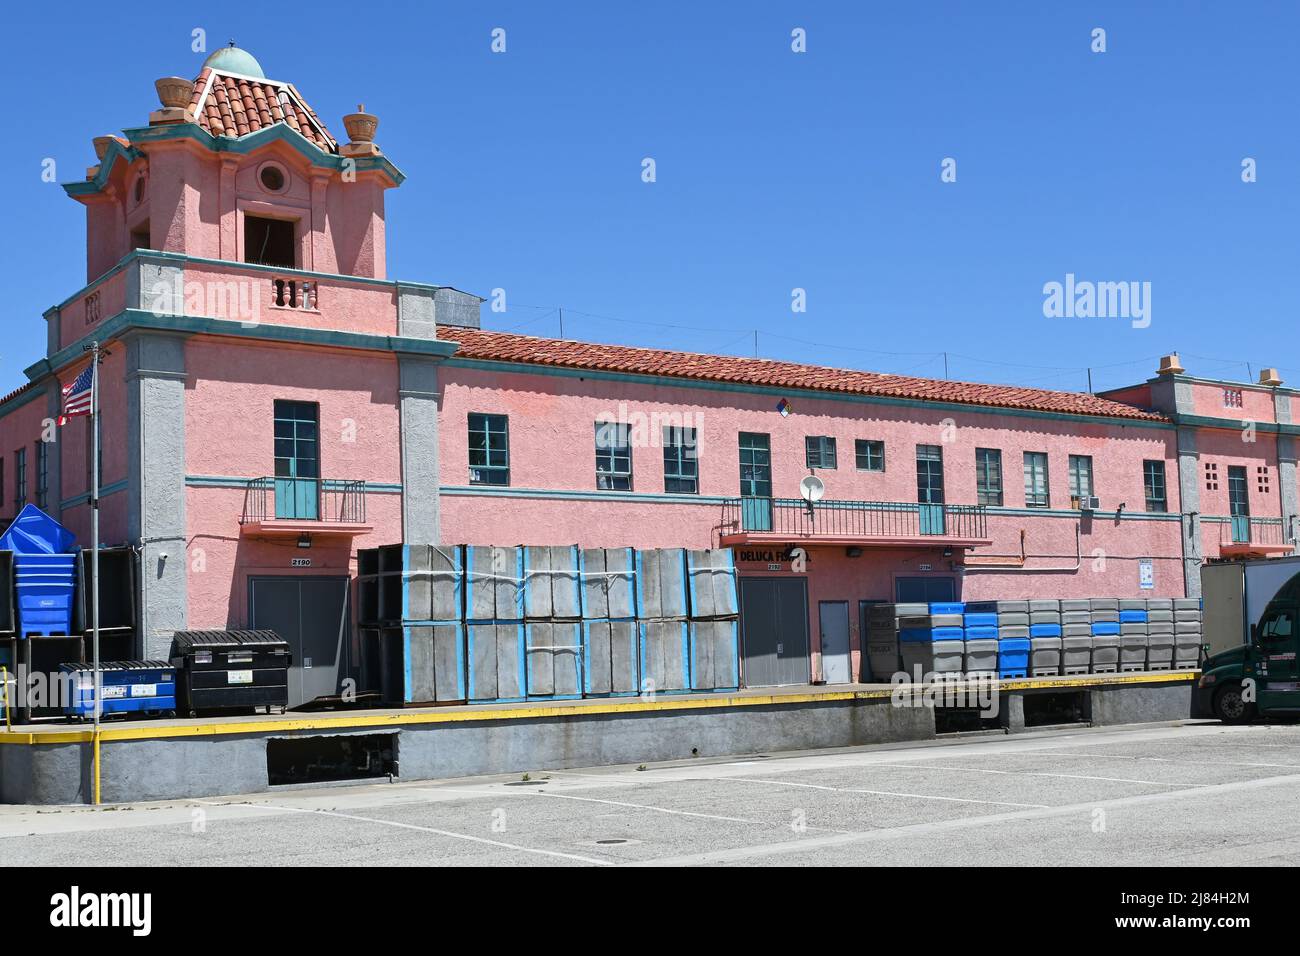 SAN PEDRO, CALIFORNIA - 11 MAY 2022: The J Deluca Fish Co. on the Main Channel in the Port of Los Angeles. Stock Photo